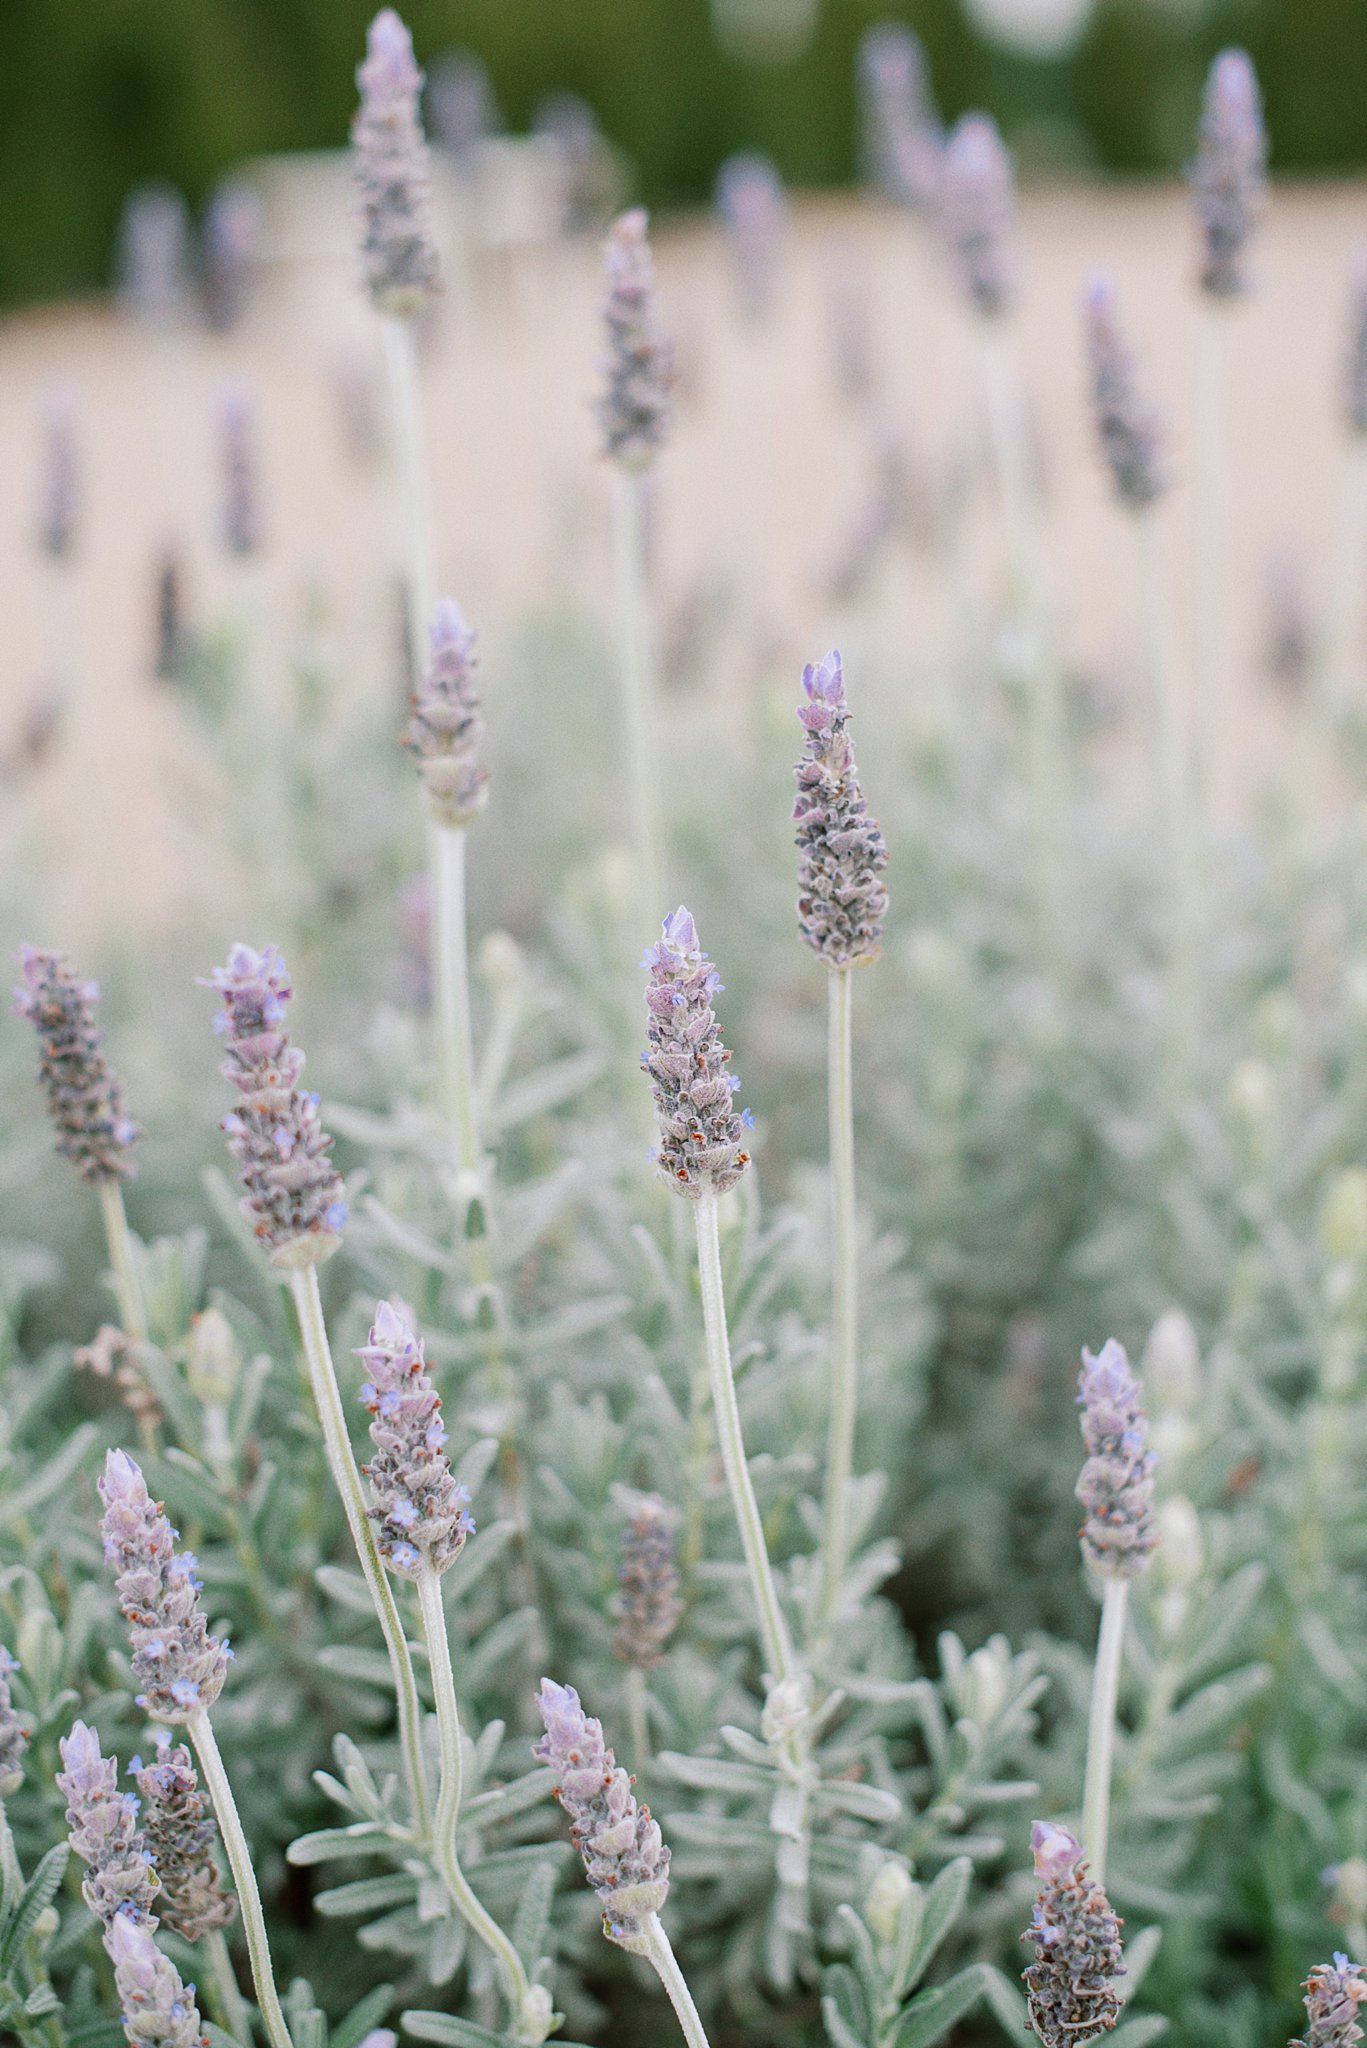 A close up of the lush lavender plants